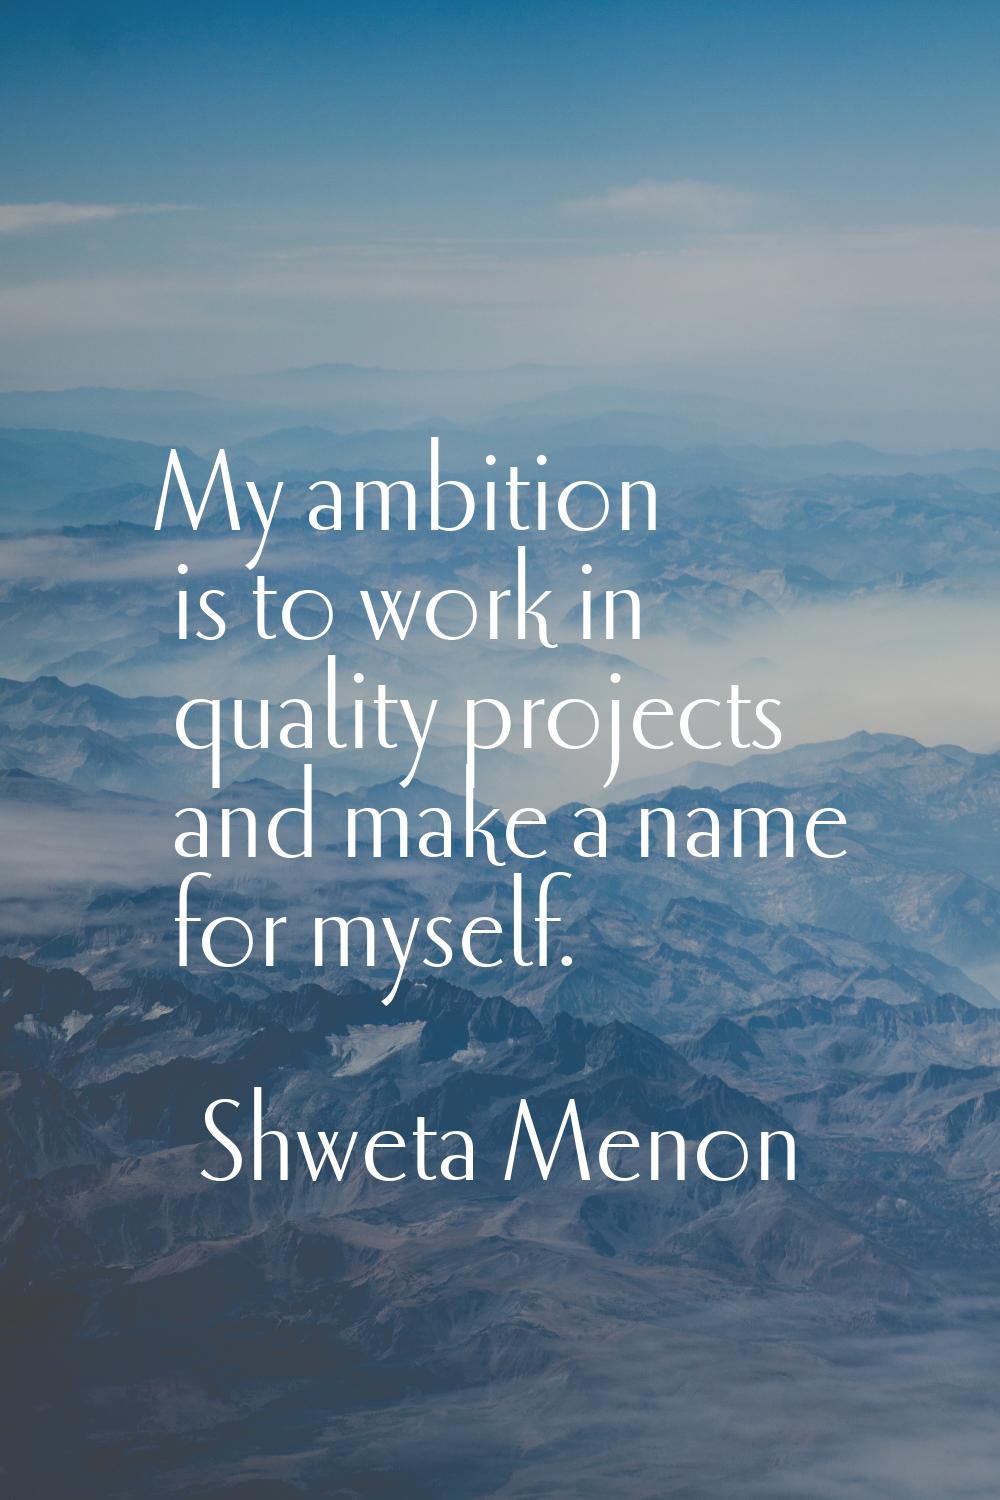 My ambition is to work in quality projects and make a name for myself.